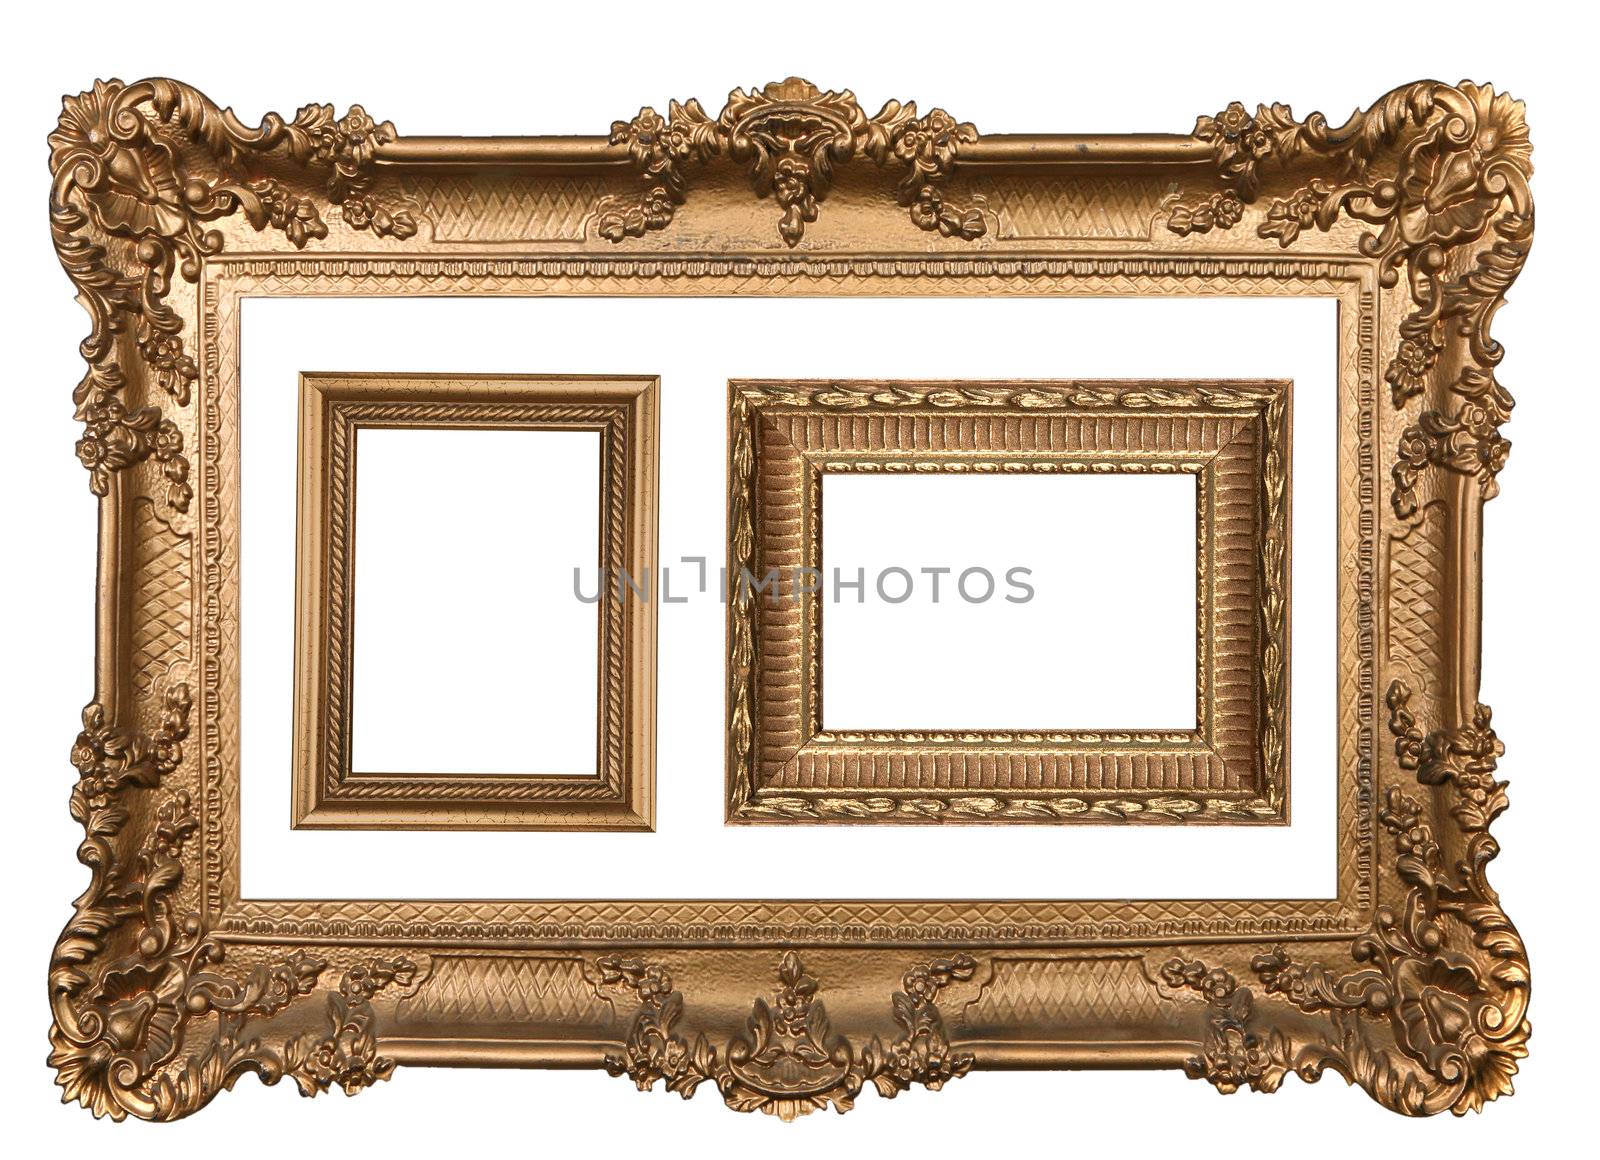 3 Decorative Gold Empty Wall Picture Frames Insert Your Own Design